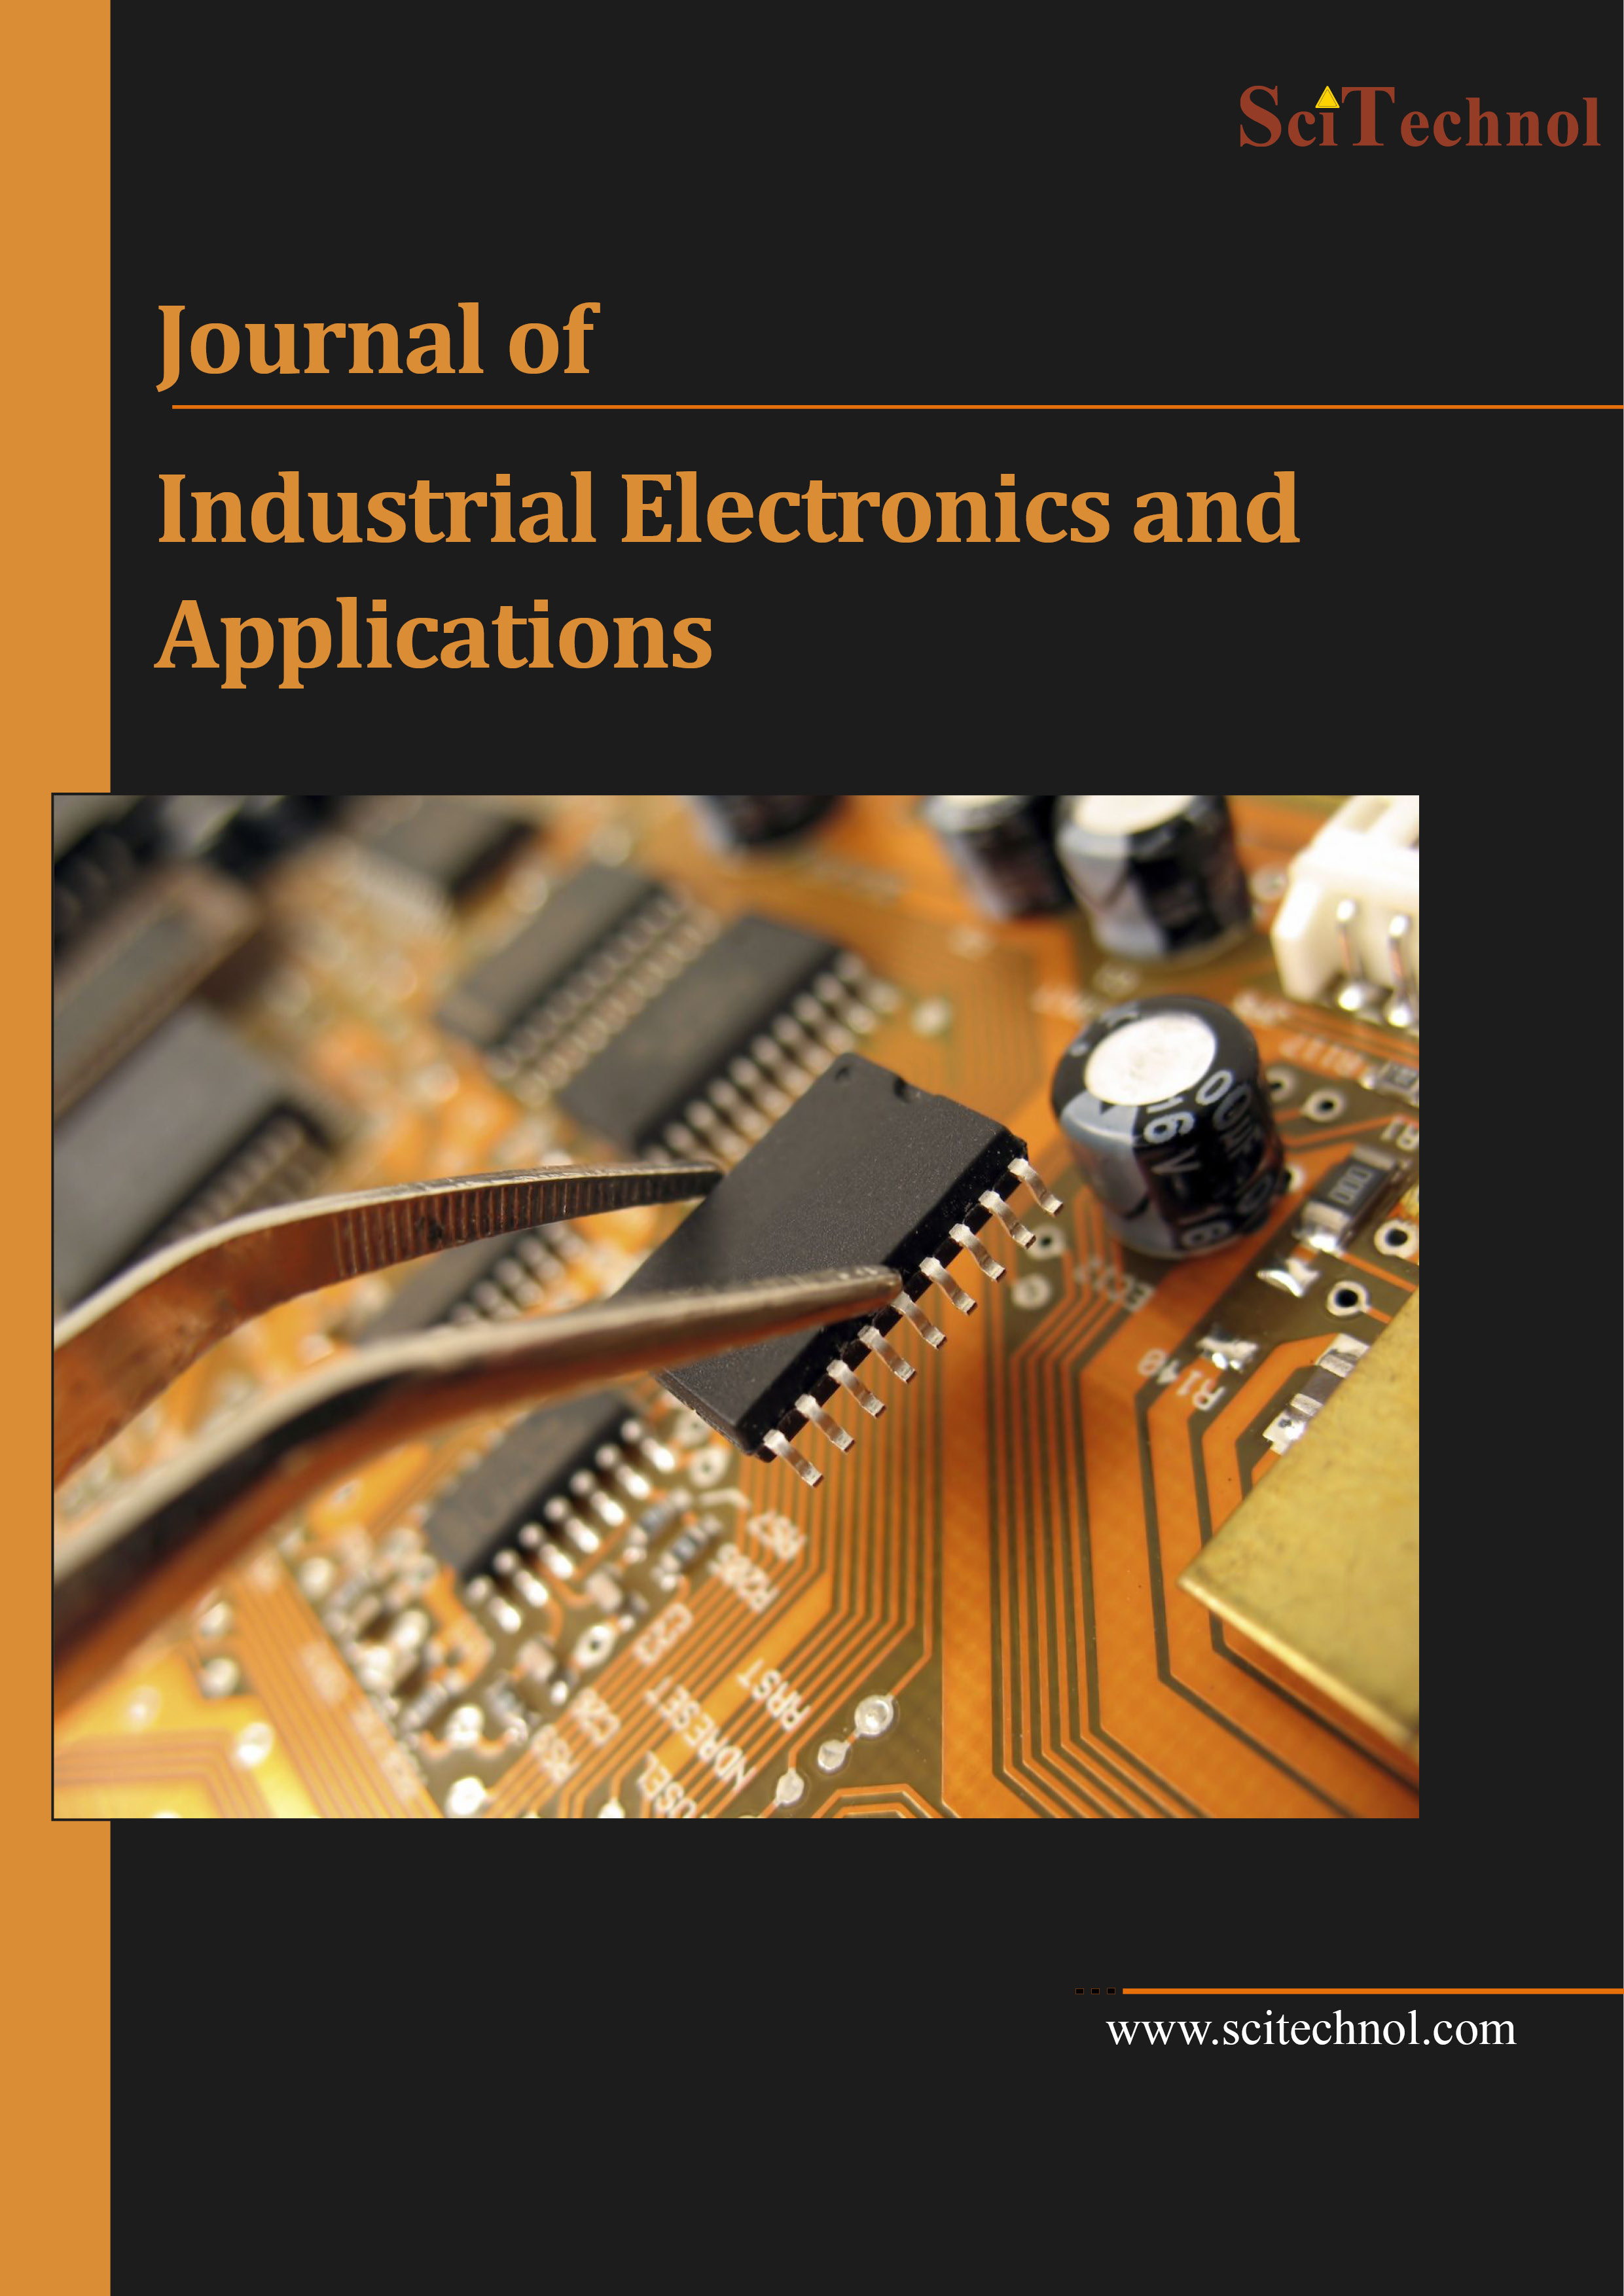 Journal-of-Industrial-Electronics-and-Applications-flyer.jpg